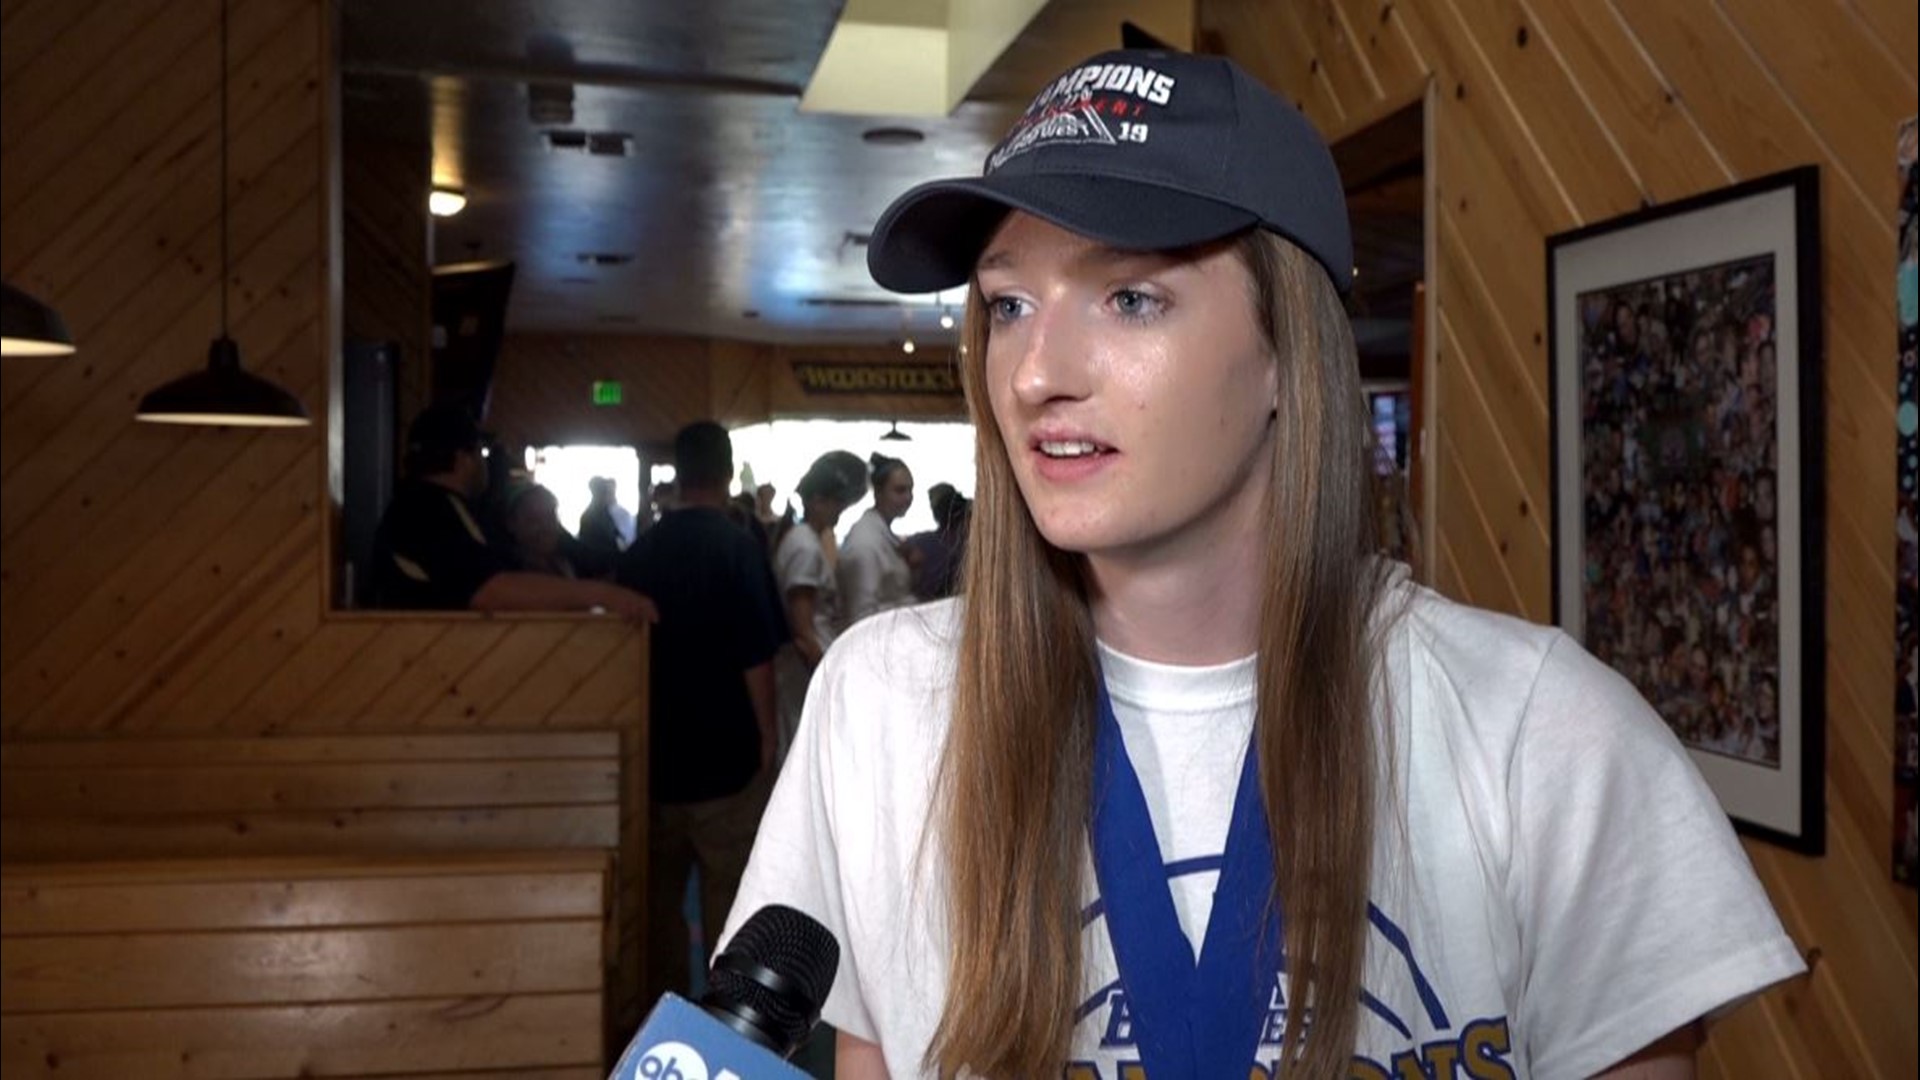 At a Selection Monday celebration at Woodstock's Pizza for the UC Davis Aggies women's basketball team, celebrating their Big West Conference Championship title, head coach Jennifer Gross speaks at the party looking ahead to Saturday's matchup with Stanford.